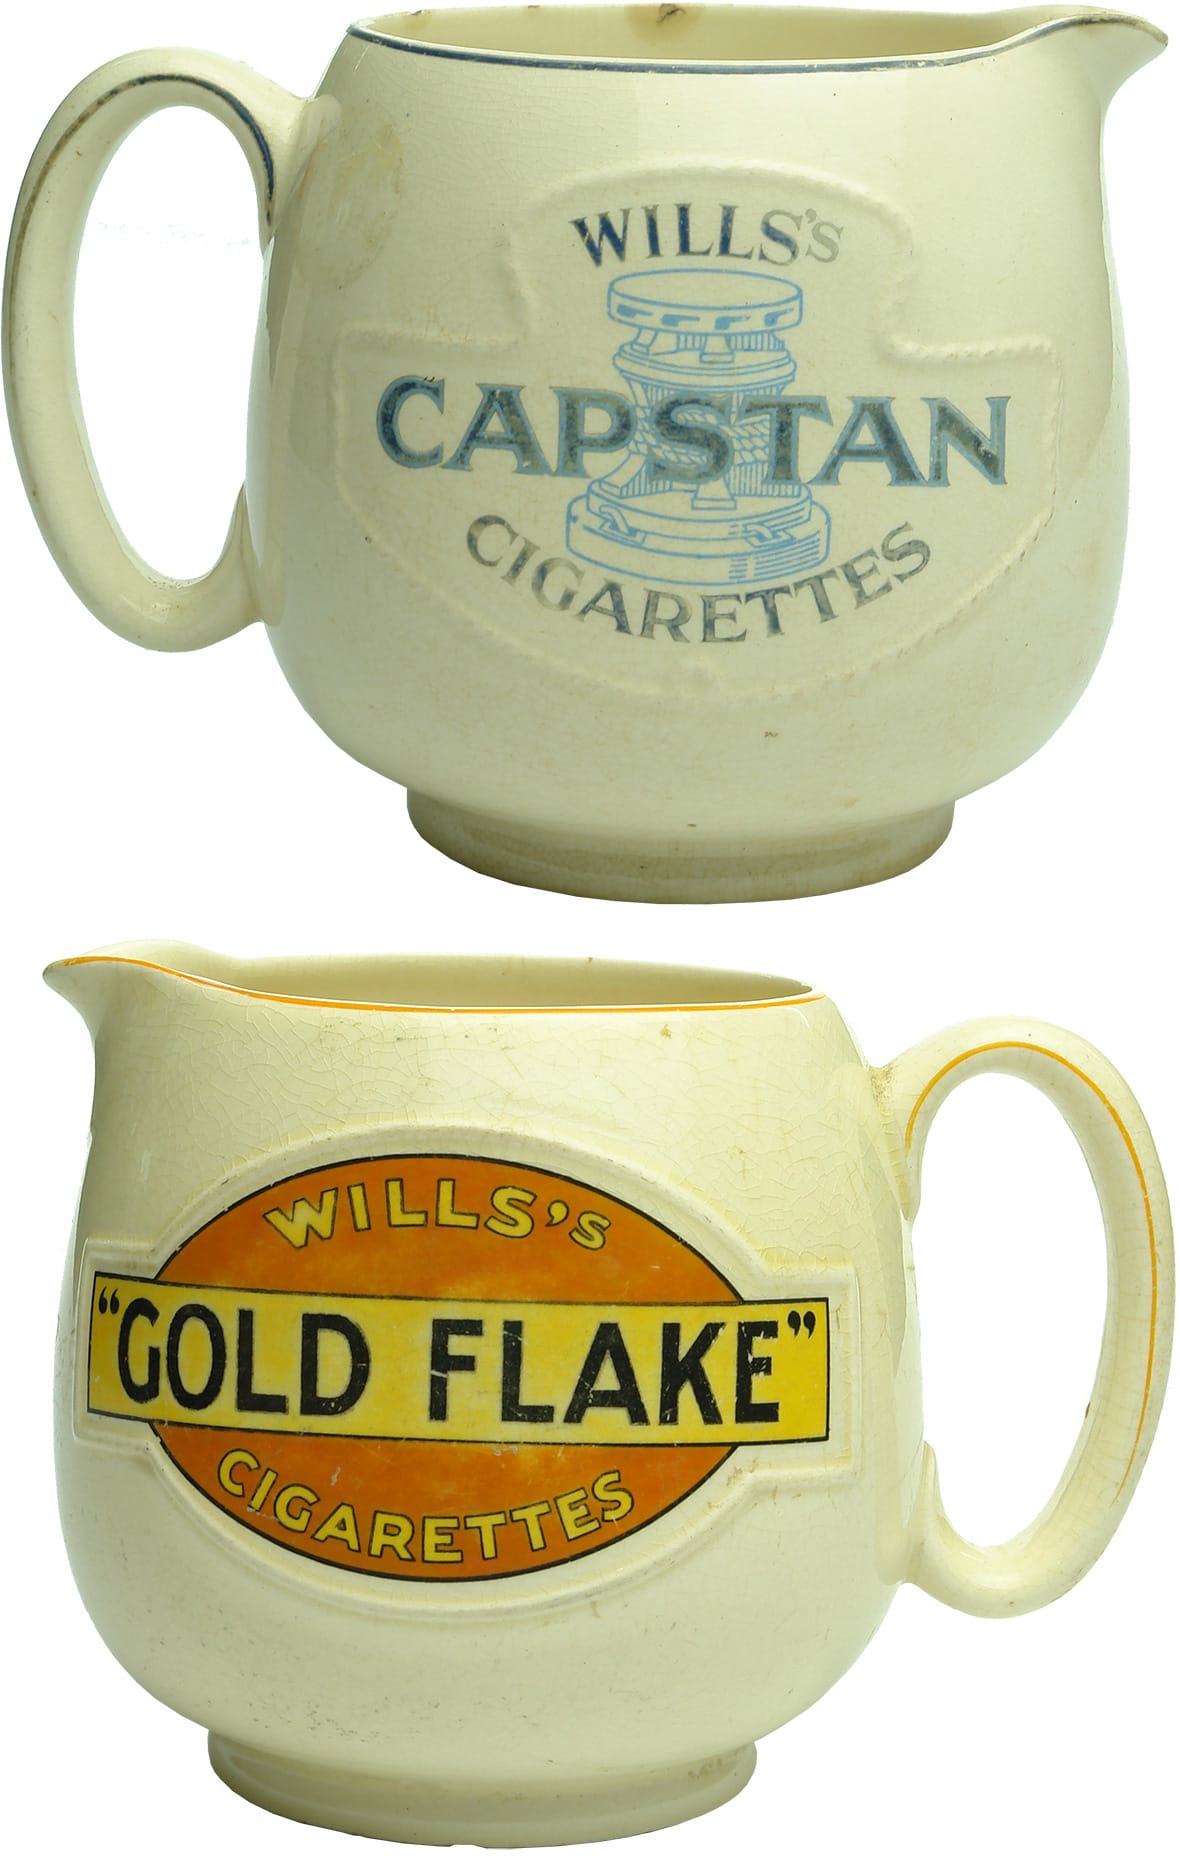 Antique Will's Gold Flake Capstan Cigarettes Advertising Water Jugs